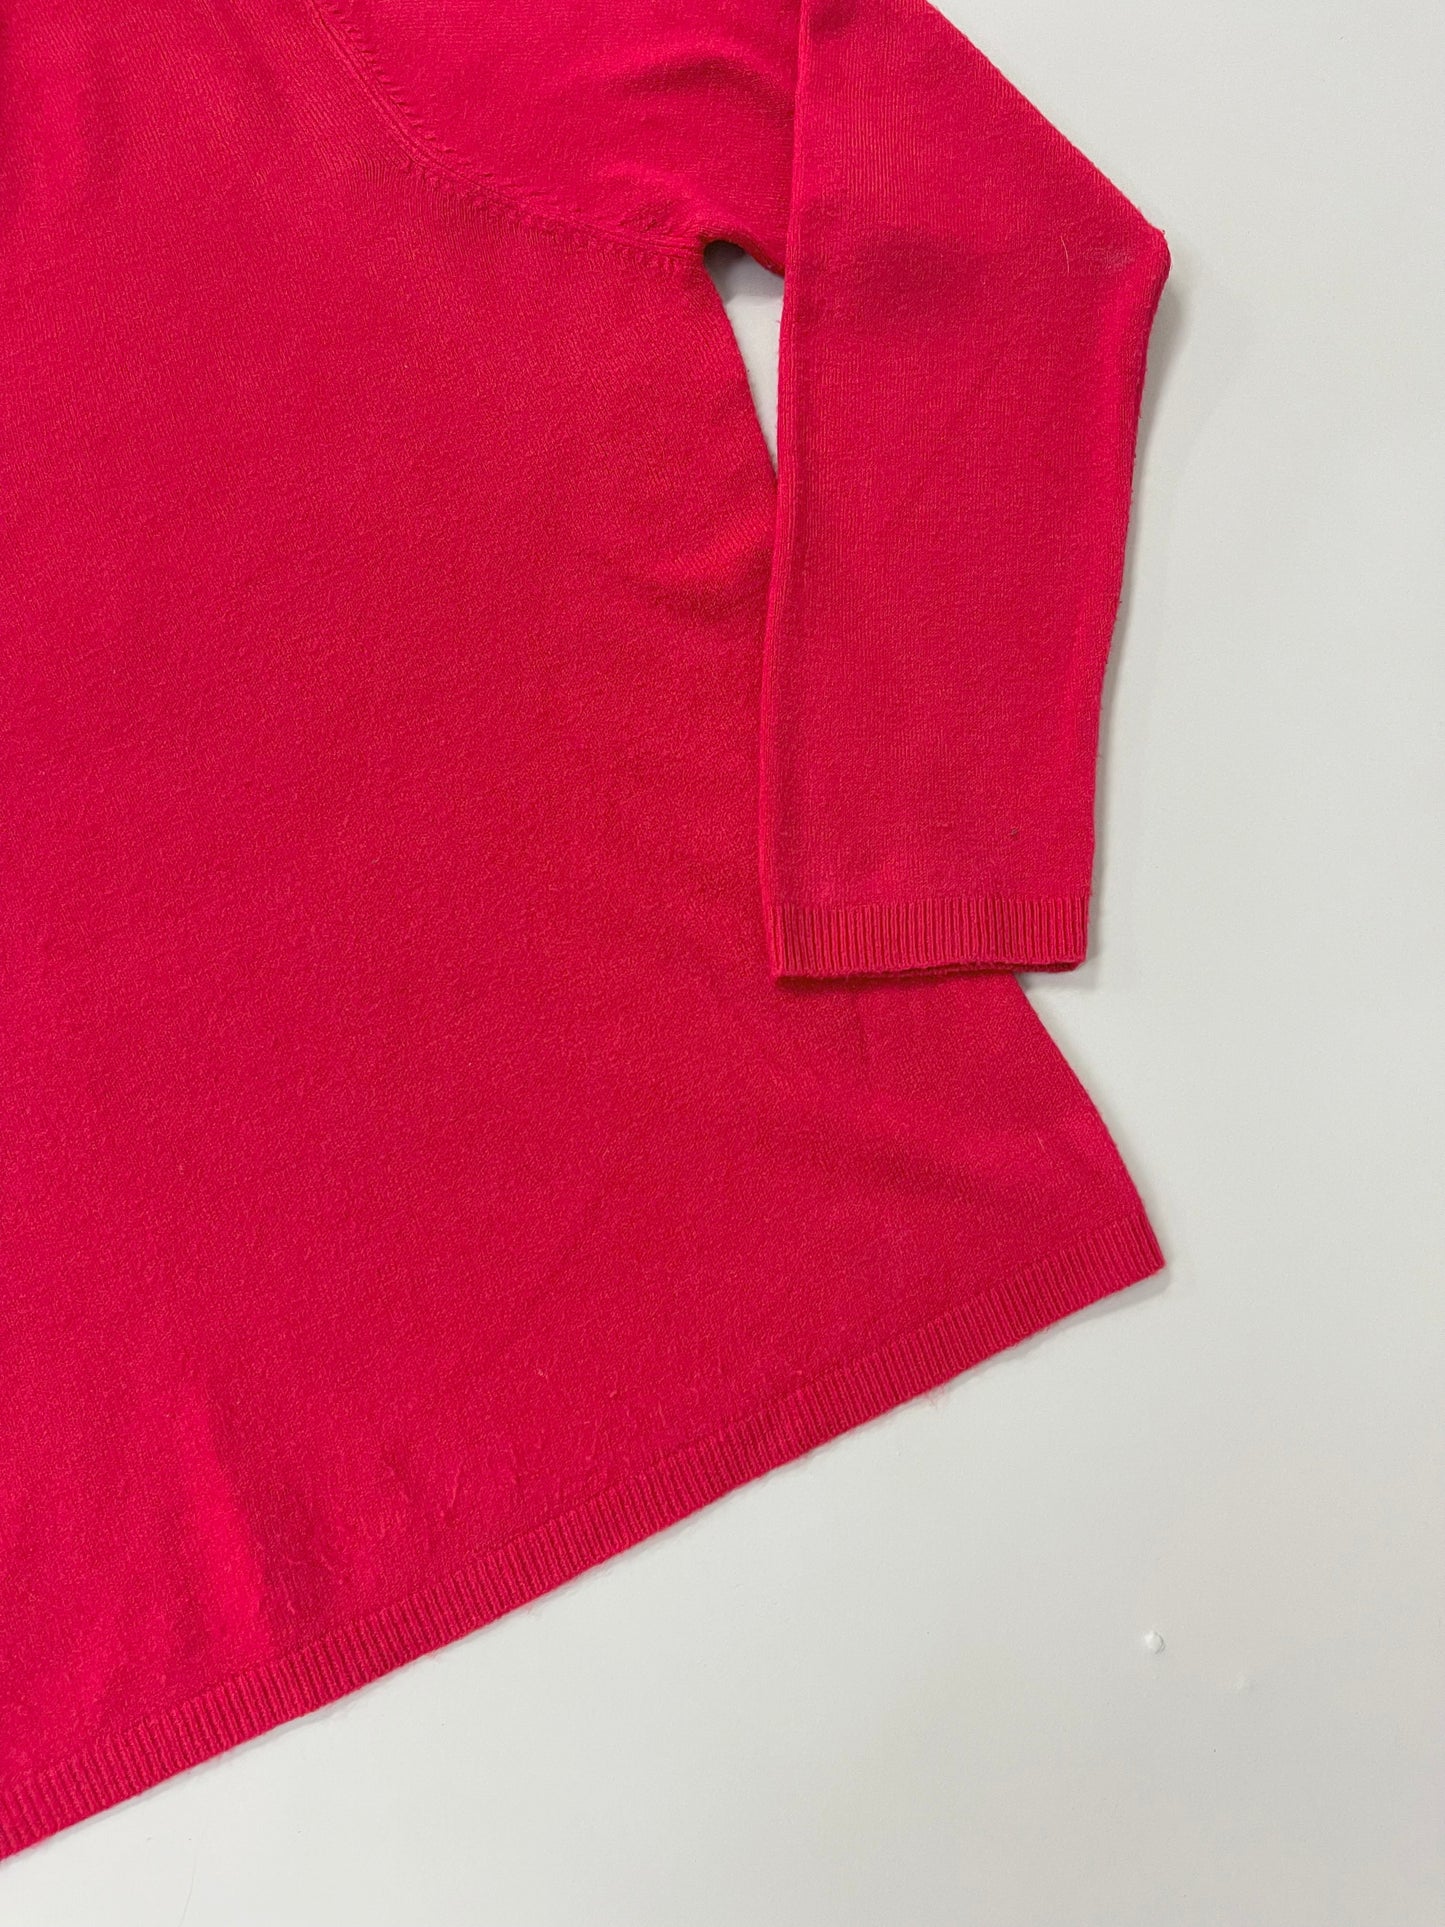 Red V-Neck Sweater - X-Large